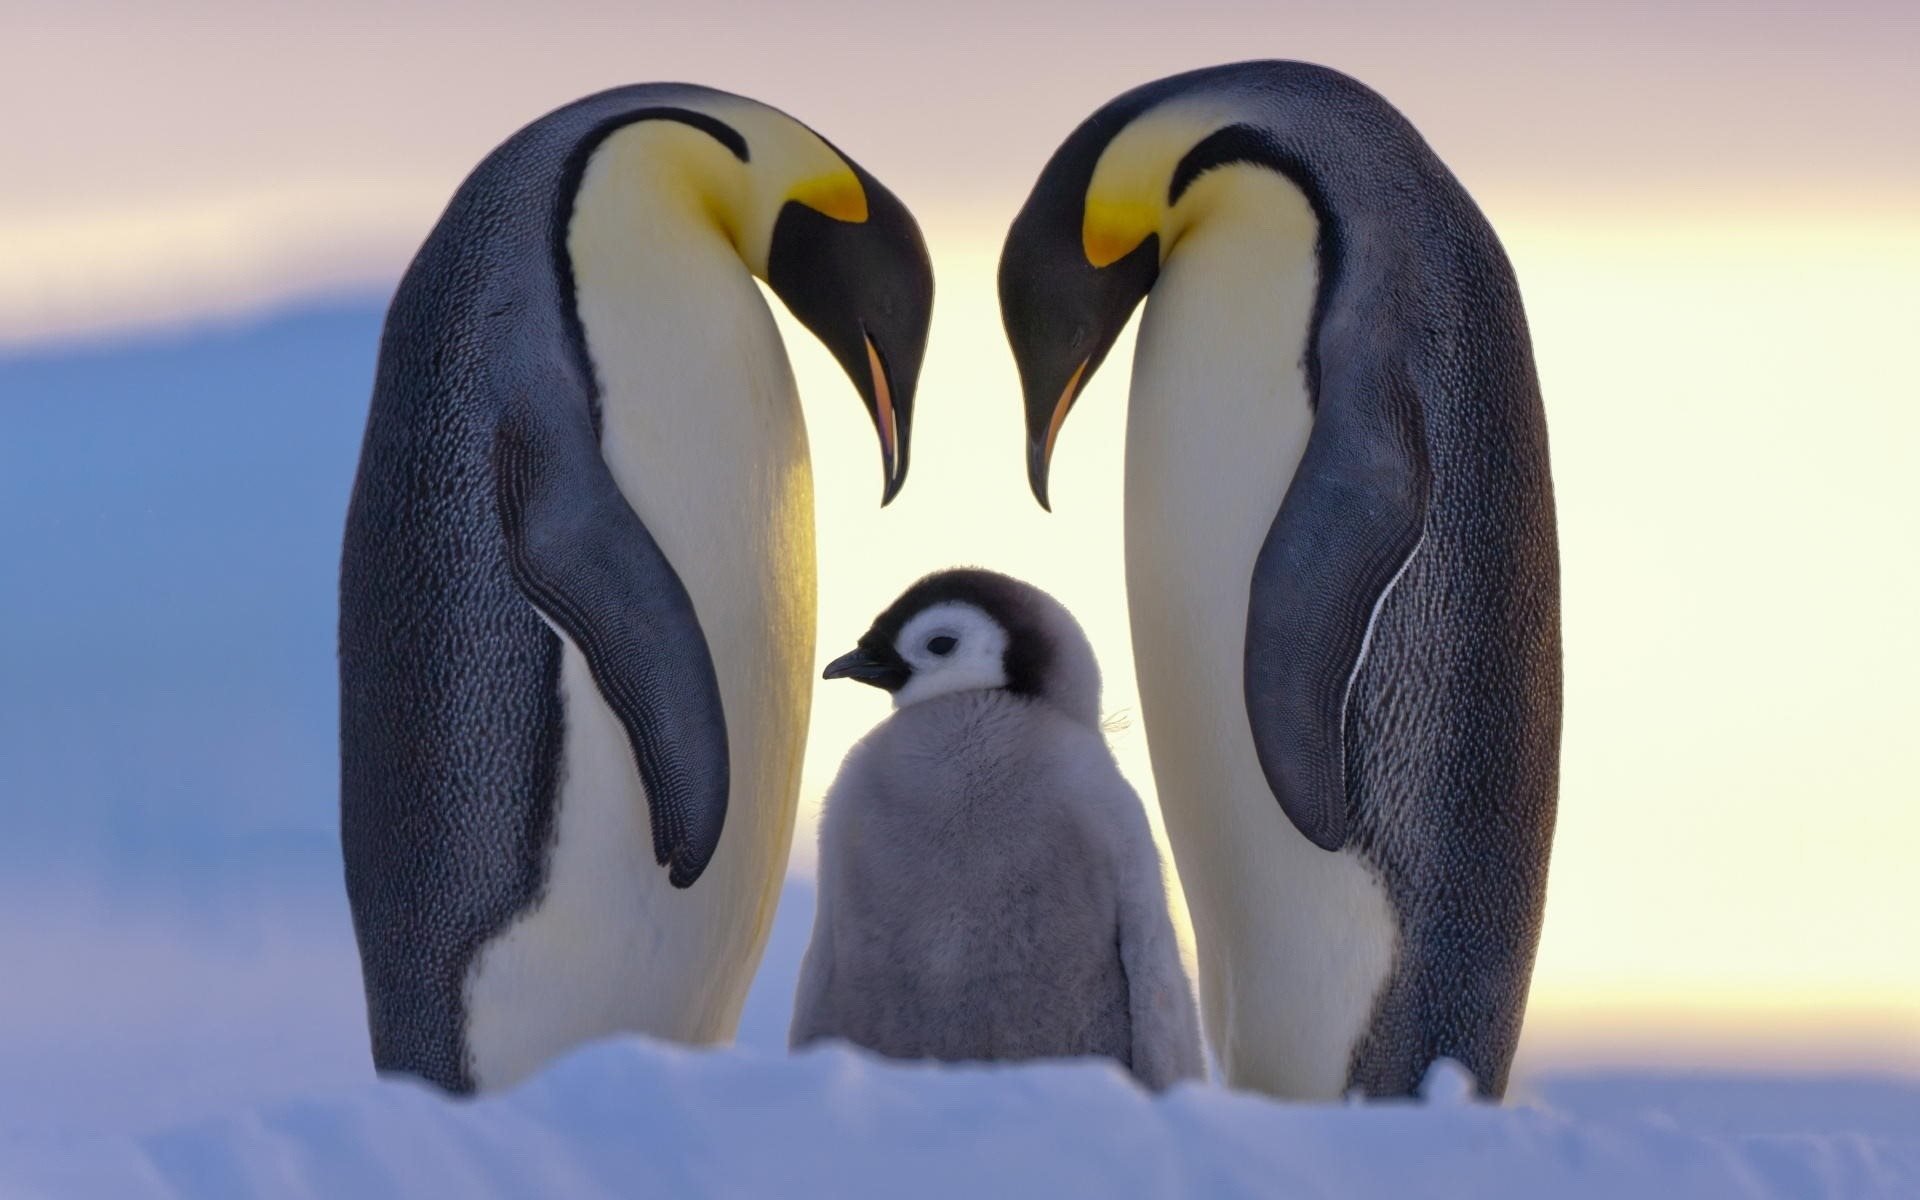 Download wallpapers penguins family little penguin north ice